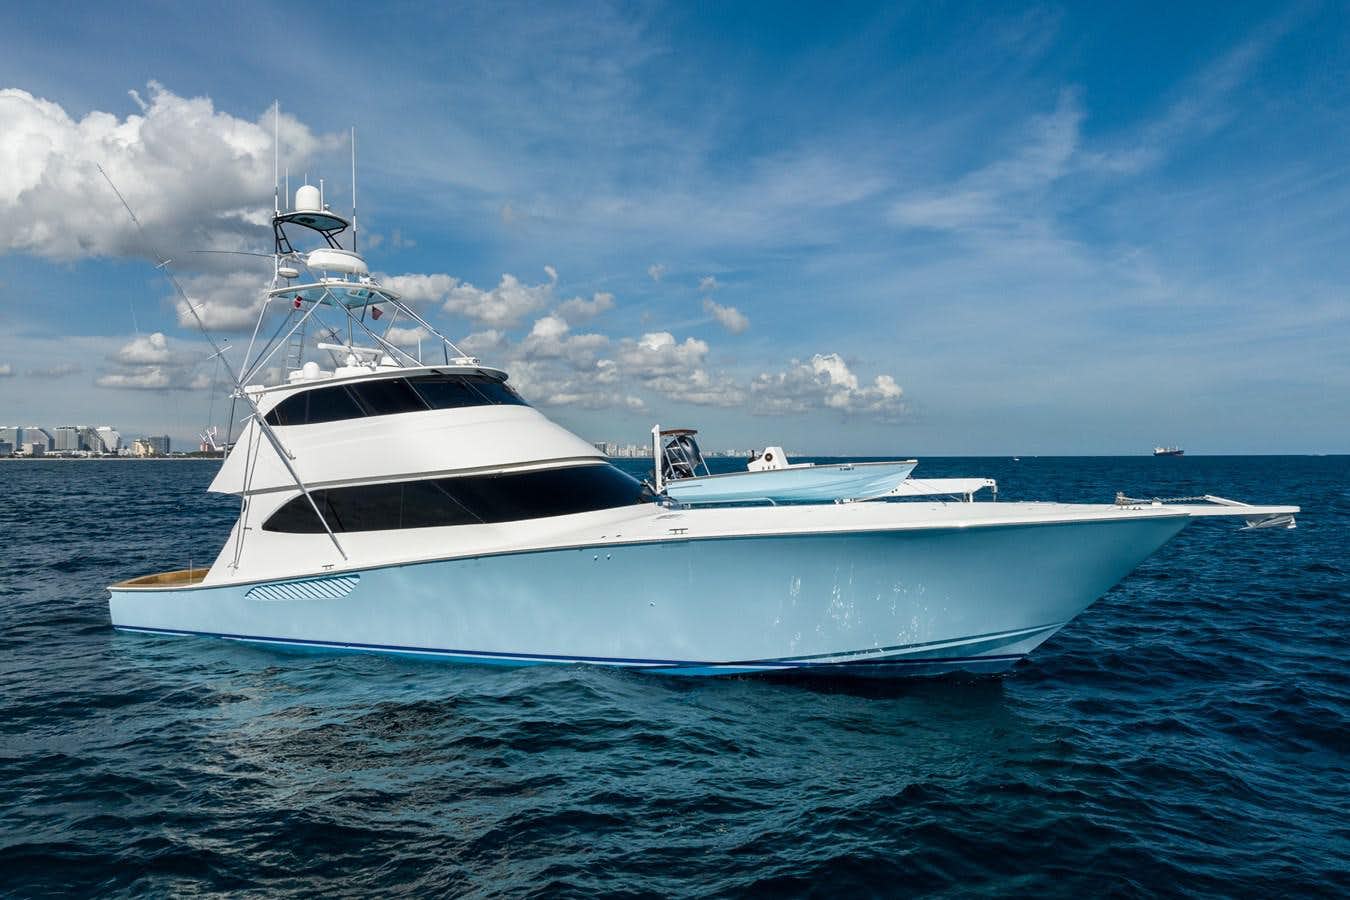 PANACEA Yacht for Sale in Fort Lauderdale, 82' (24.99m) 2013 VIKING